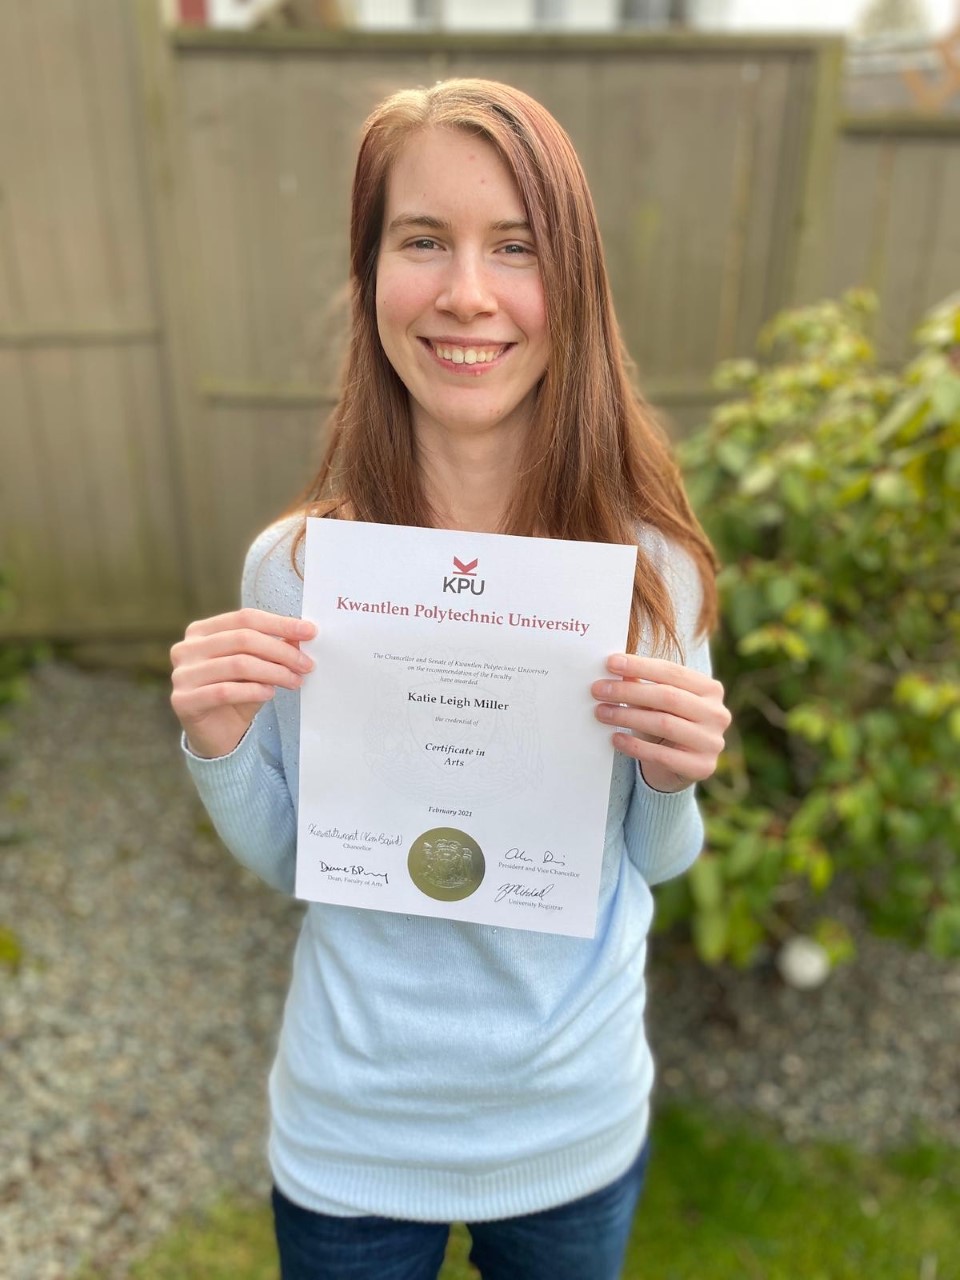 a young woman with long brown hair is smiling at the camera while holding a certificate from Kwantlen Polytechnic University. It shows her name in black text as Katie Leigh Miller. Text below that reads Certificate in Arts. there are signatures and a large golden seal at the bottom of the certificate. Katie is wearing a light blue sweater and dark blue jeans. She is standing in what appears to be a back yard with a tall wooden fence behind her.